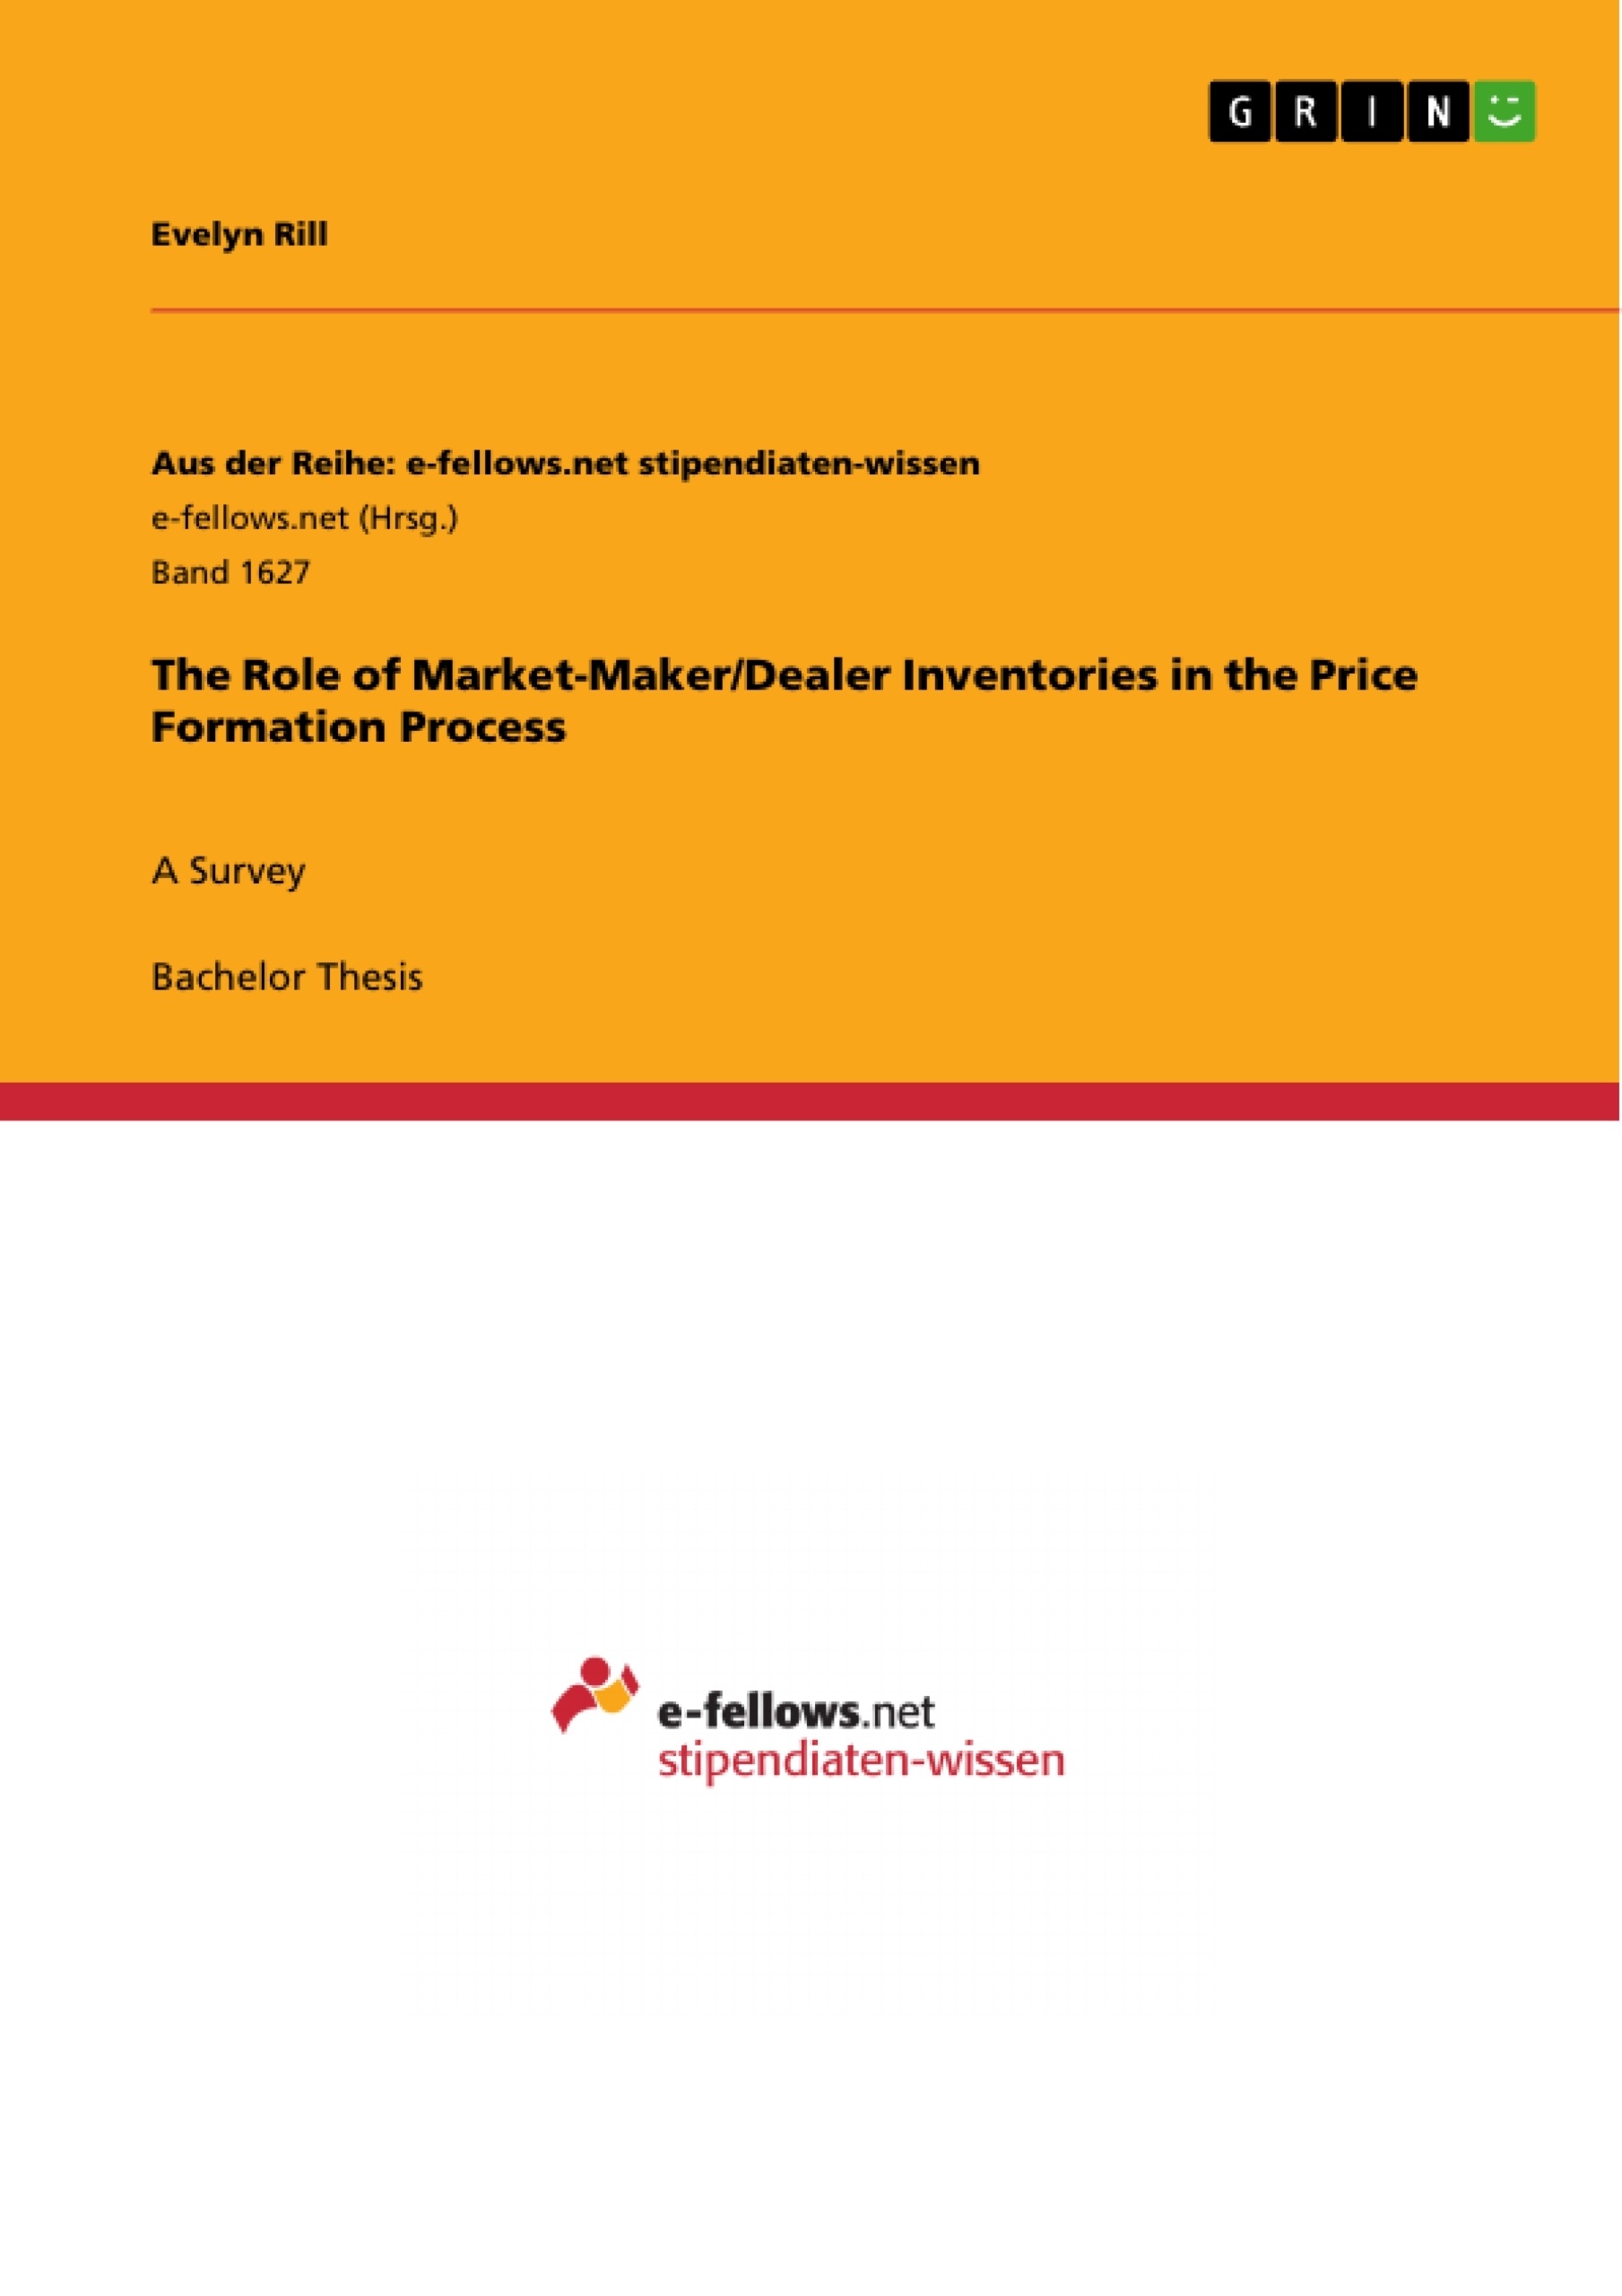 Titre: The Role of Market-Maker/Dealer Inventories in the Price Formation Process